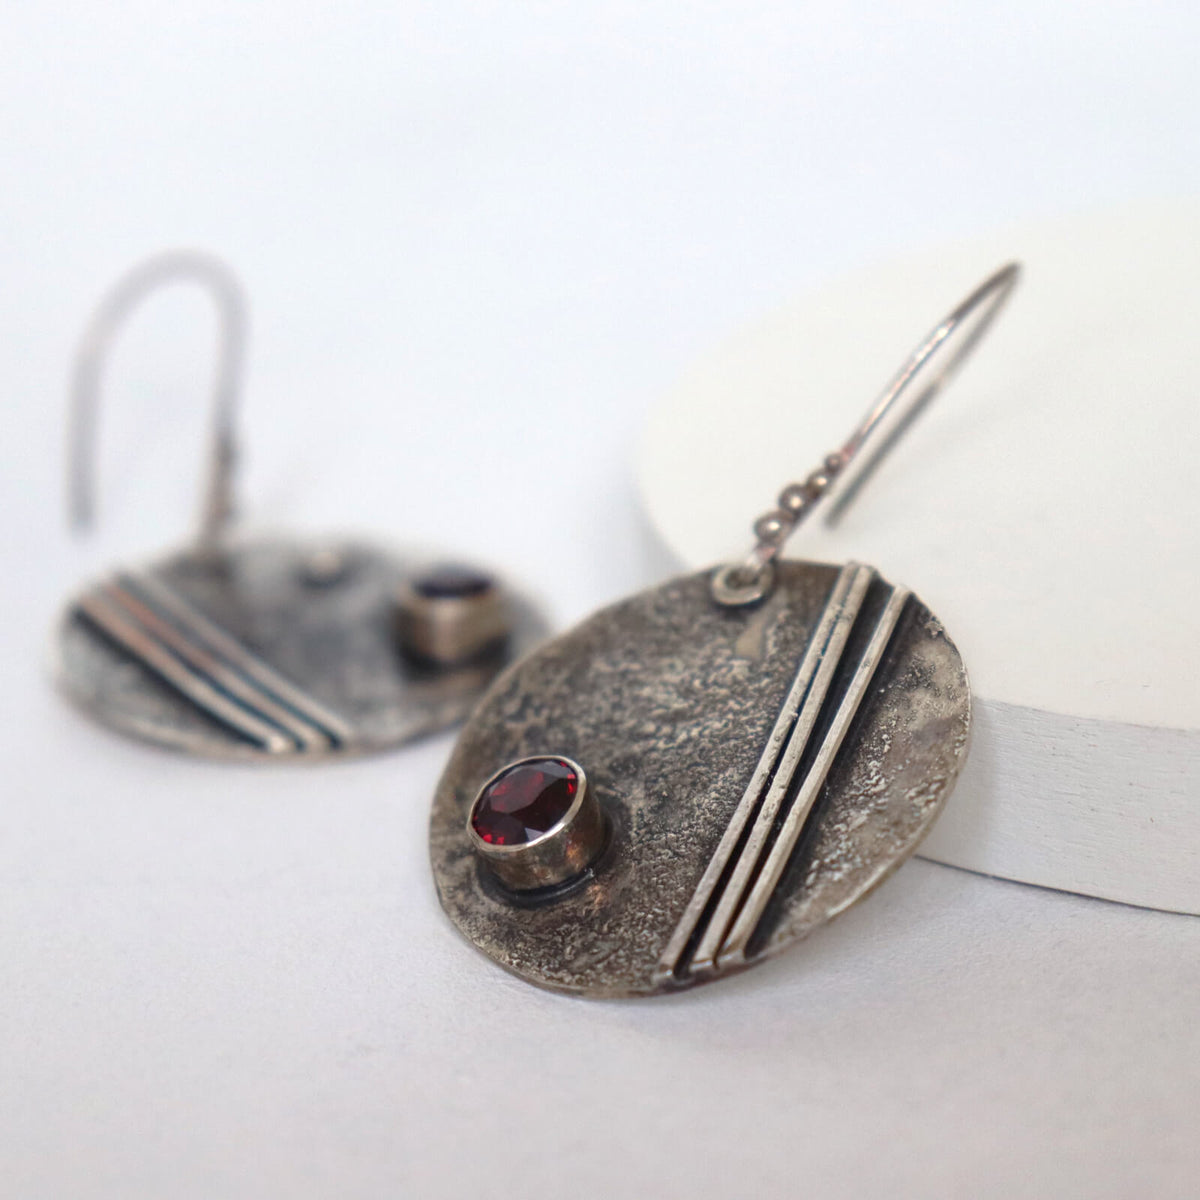 oxidized silver earrings with stripes and garnet stones, large dangle earrings, handmade by roff